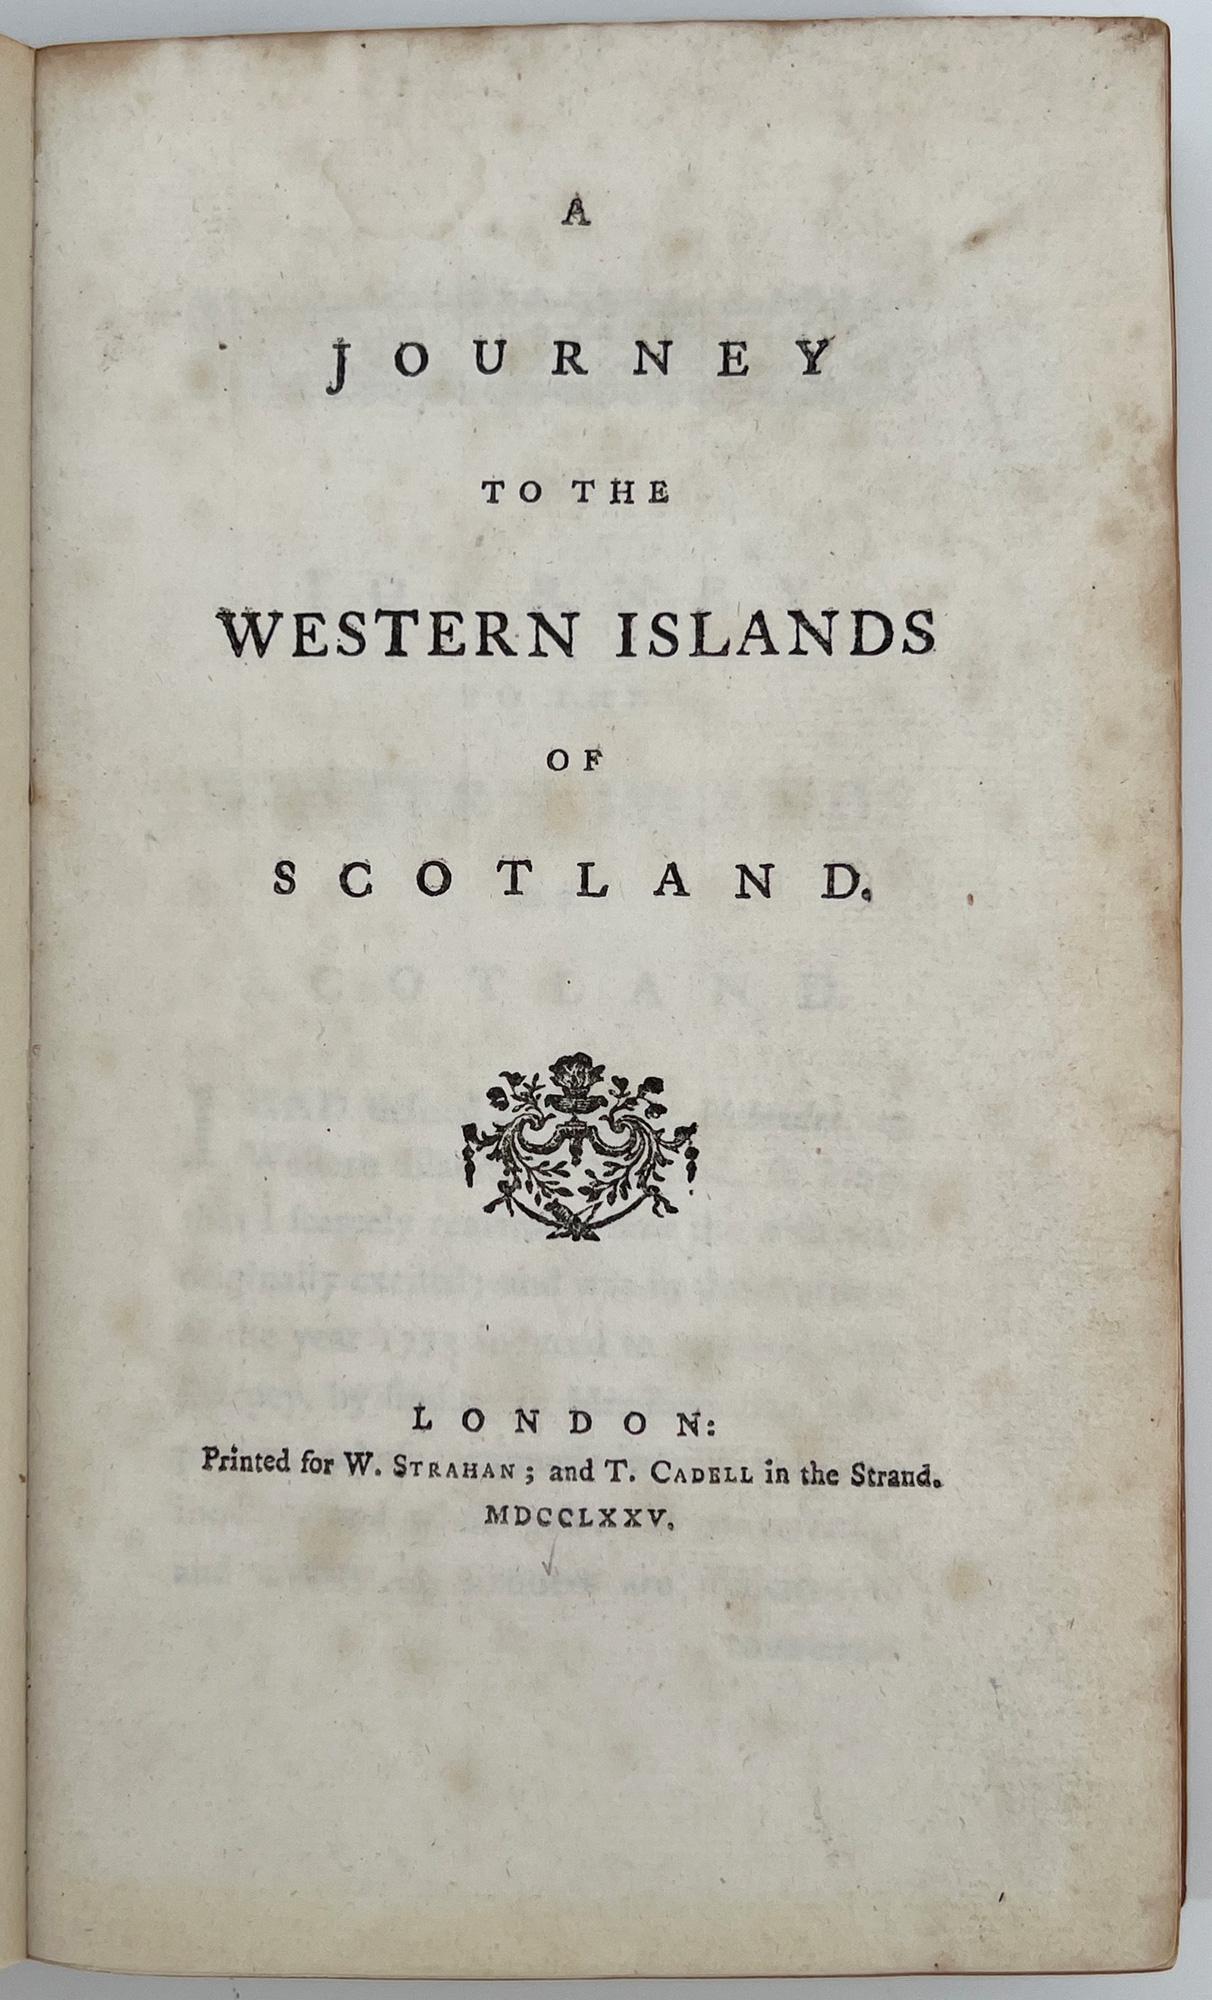  London: W. Strahan and T. Cadwell, 1775. 
FIRST EDITION, FIRST STATE
8vo, 8 3/8 x 5 1/4 (212 x 132 mm); Title, 284 pp, 1 leaf (errata with 11 items on 12 lines). Printed on laid paper, some foxing and offset. Later binding in crushed light tan